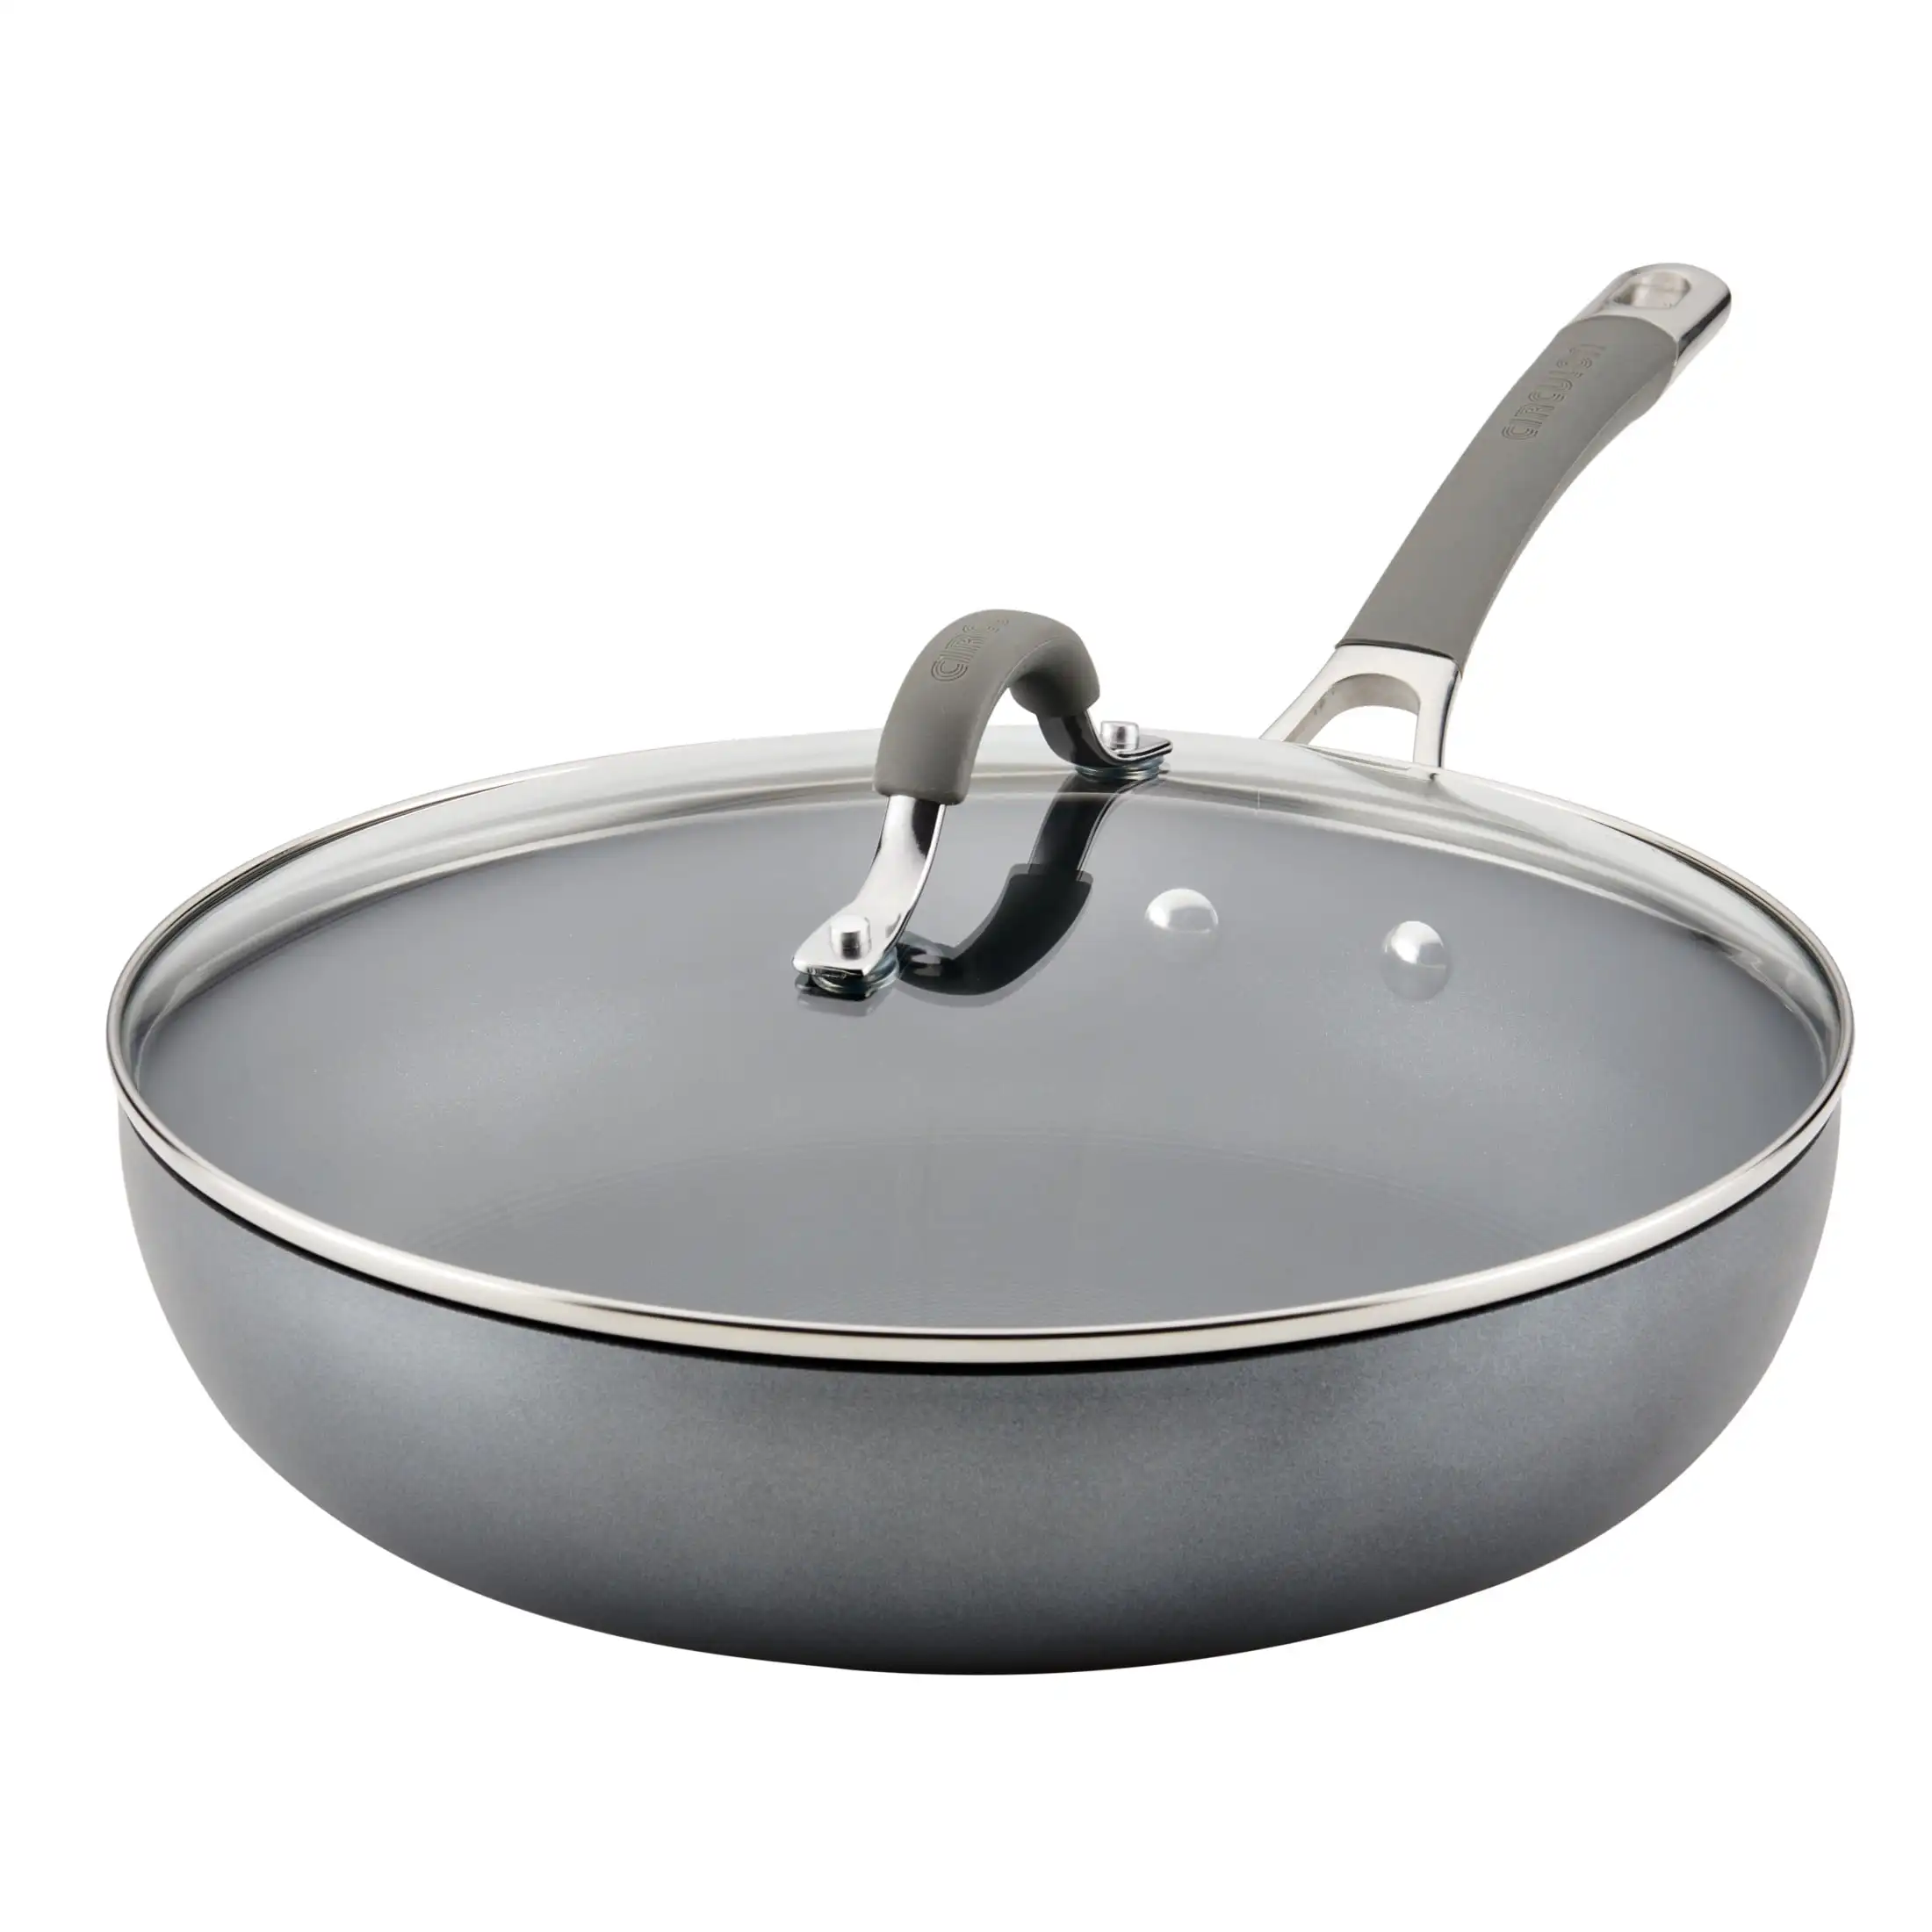 

Circulon Elementum Hard-Anodized Nonstick Deep Frying Pan with Lid 12-Inch Gray reach for the Circulon